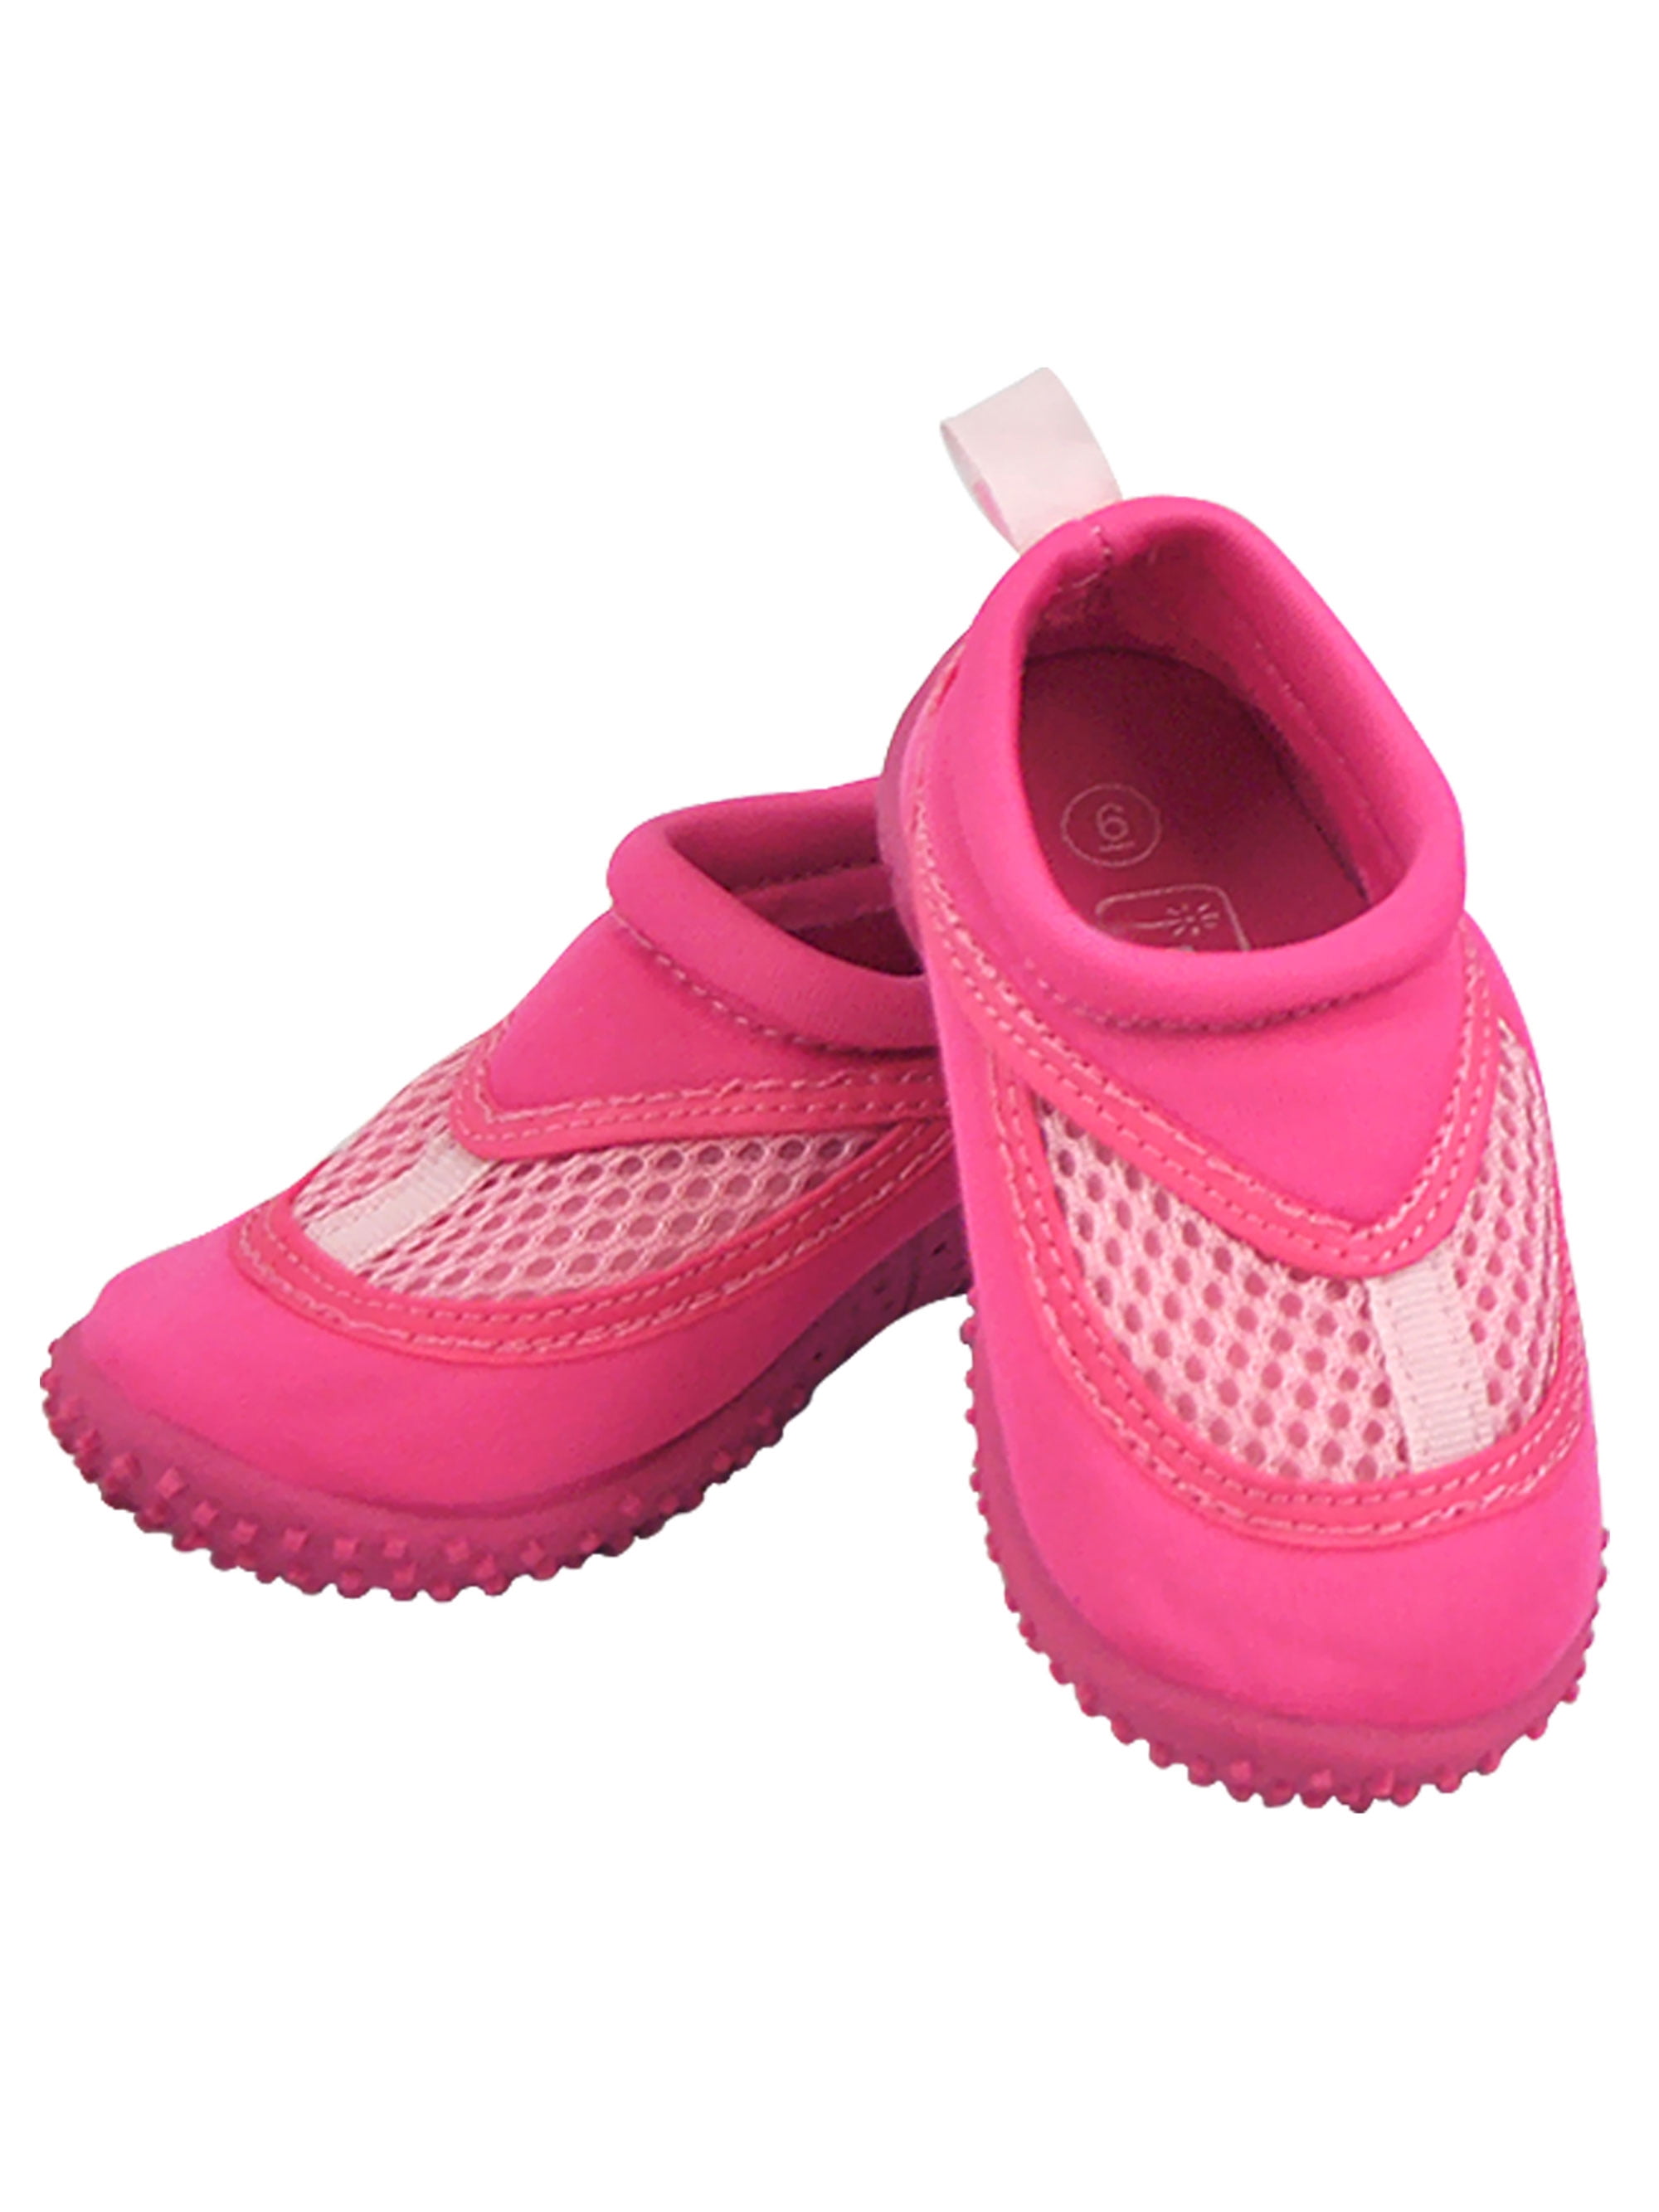 pink baby shoes size 4